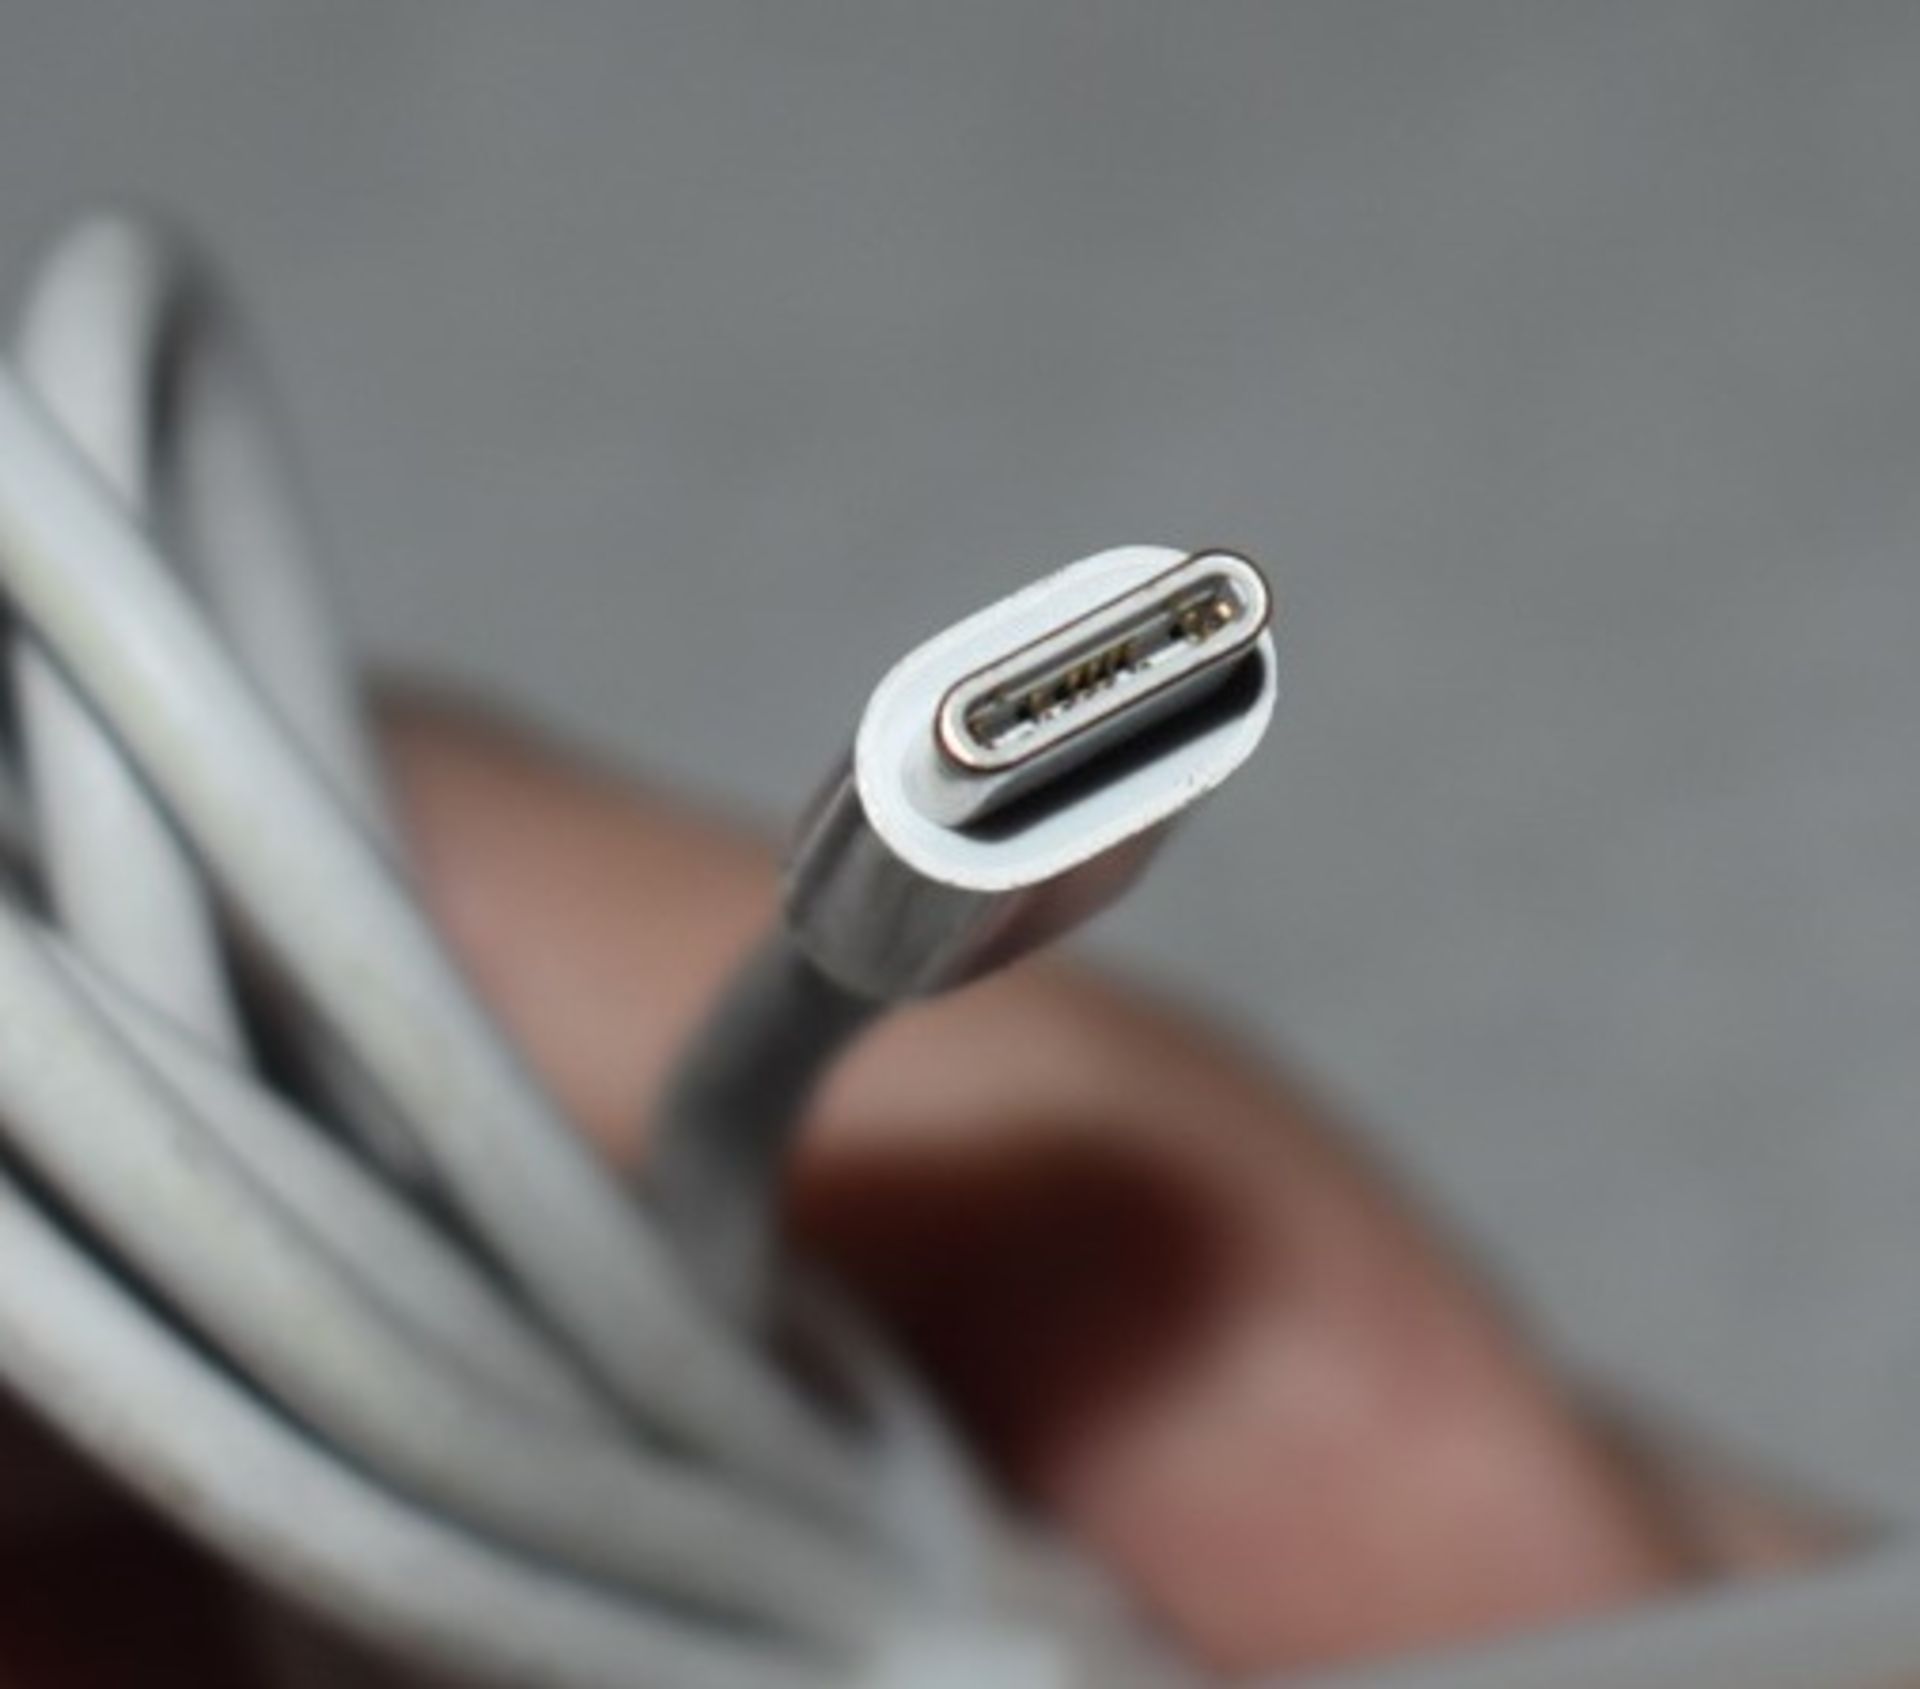 1 x Genuine Apple MacBook Type C Charger - Ref: MPC526 CG - CL678 - Location: Altrincham WA14This - Image 2 of 3